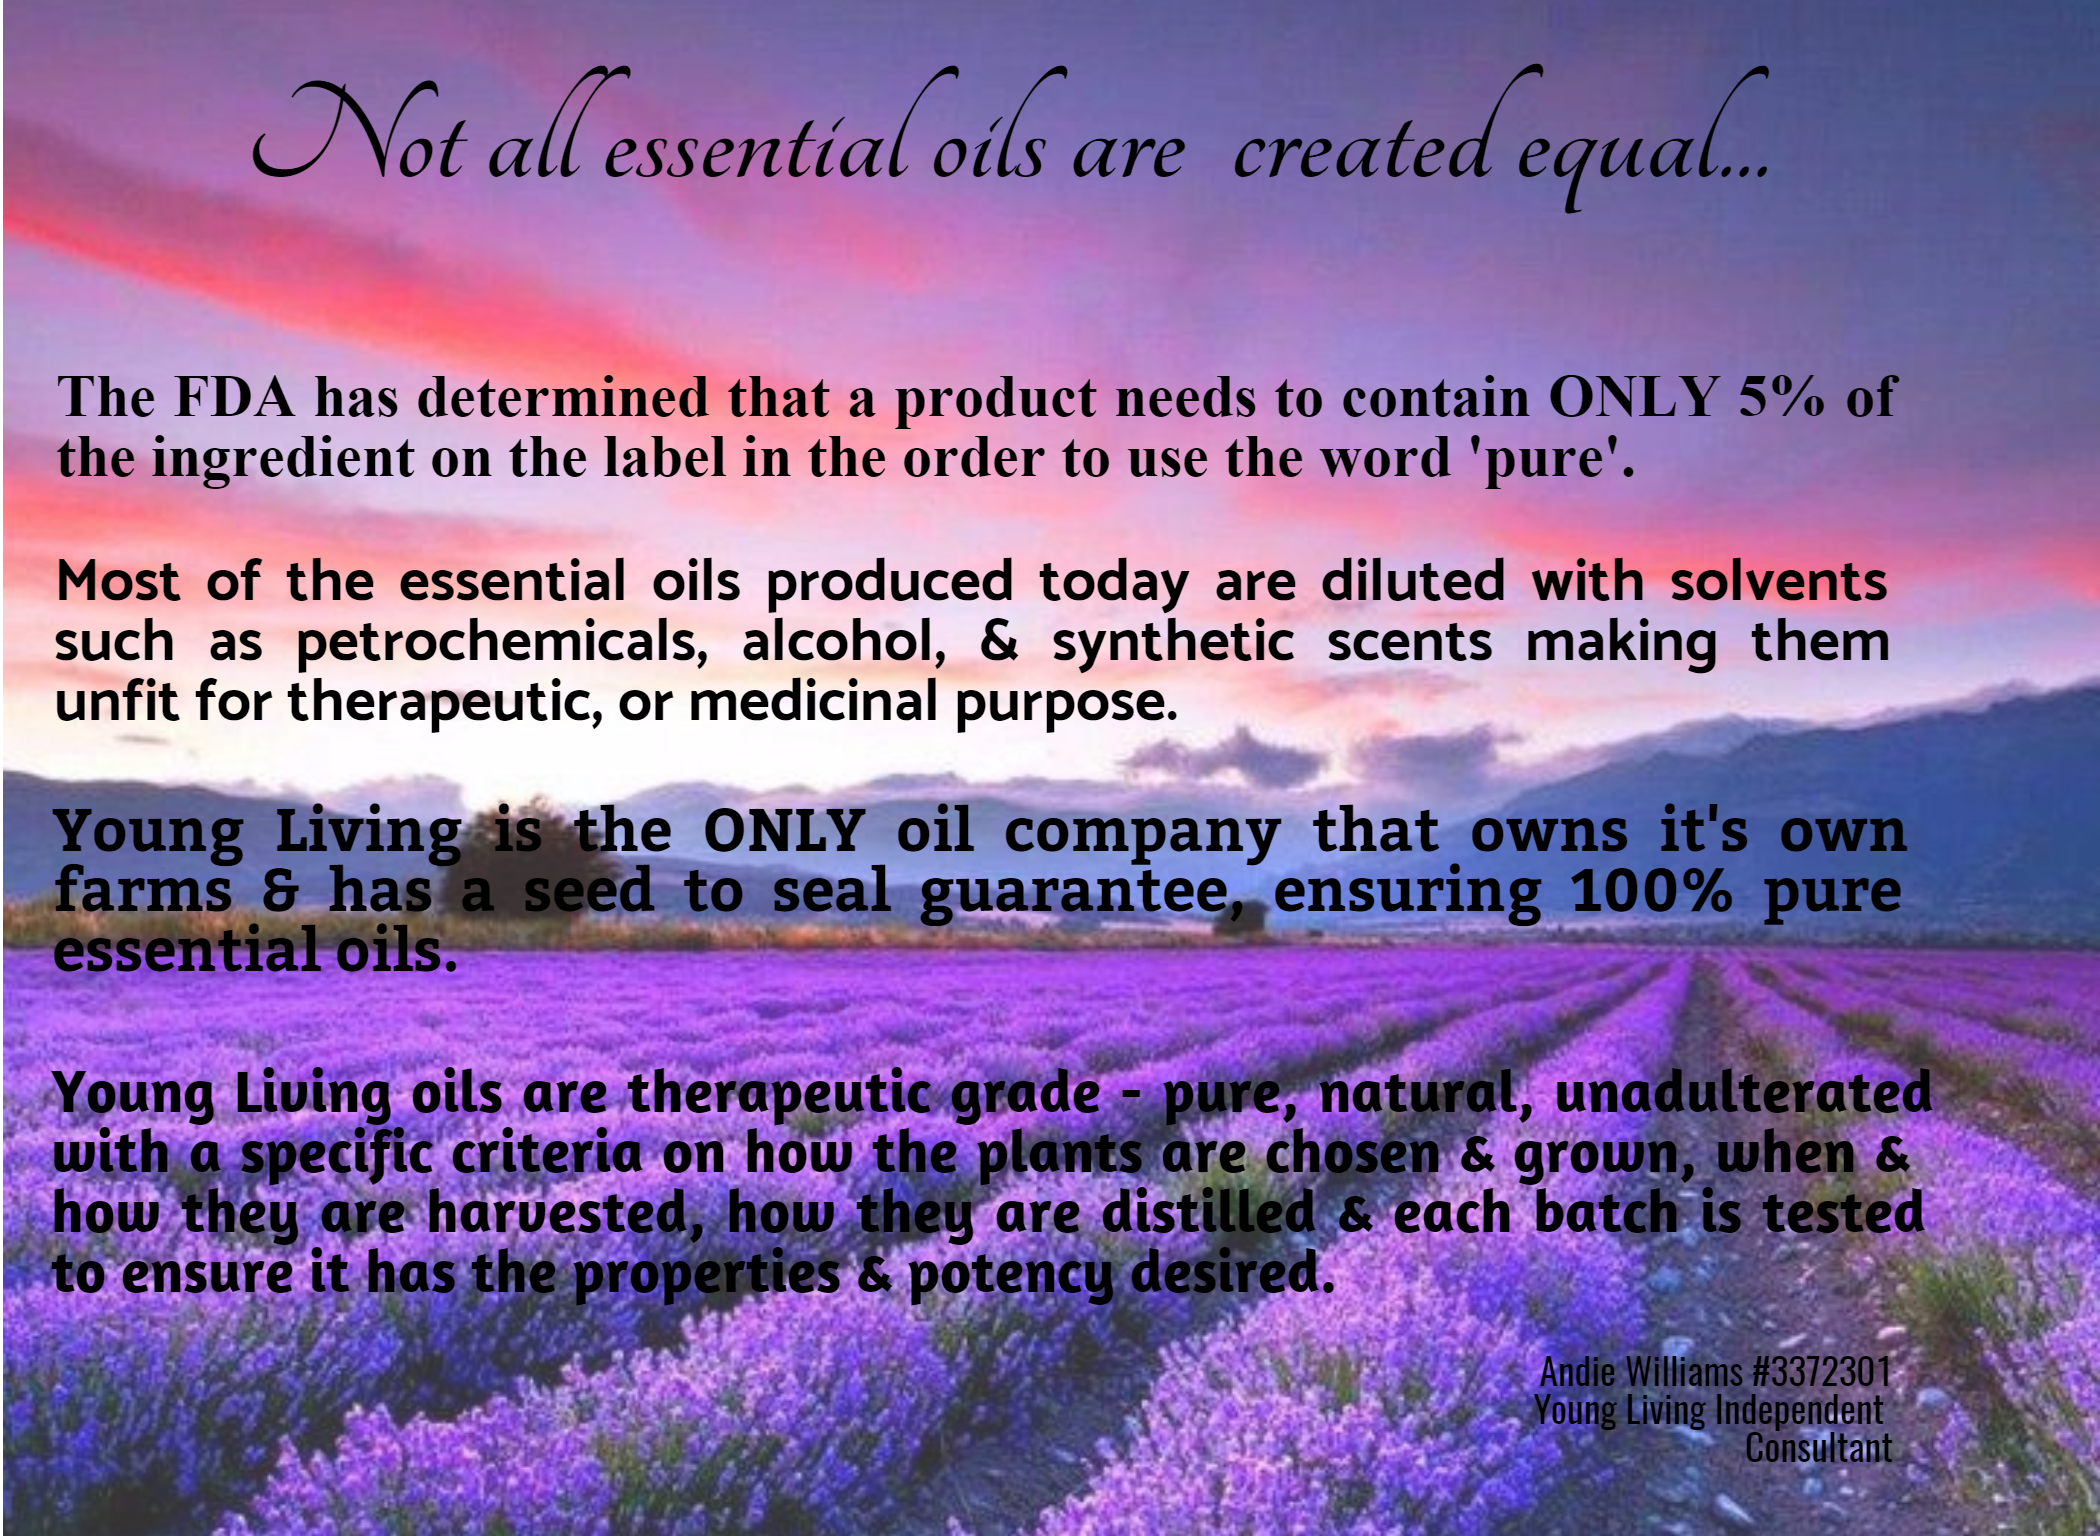 Not all oils are created equal Design 